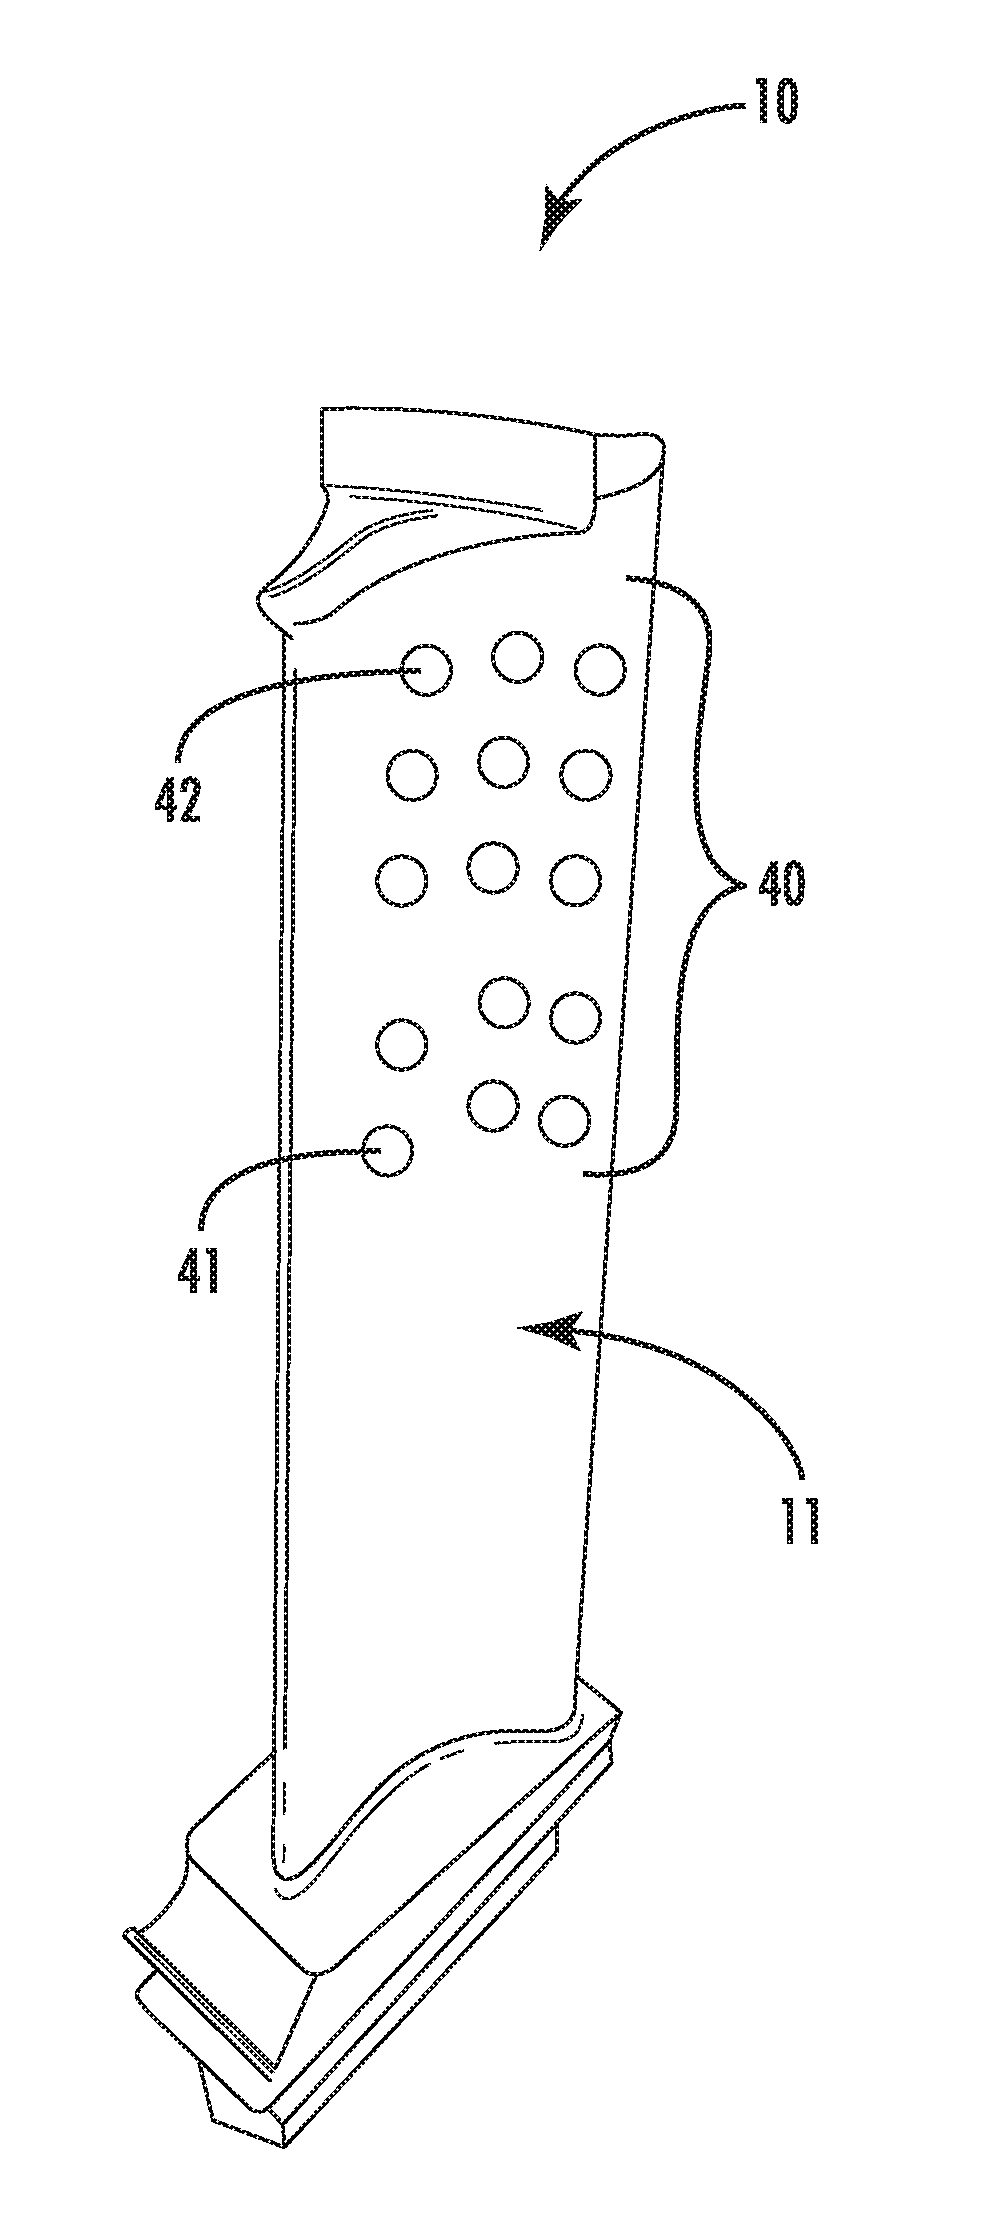 Systems and methods for evaluating component strain